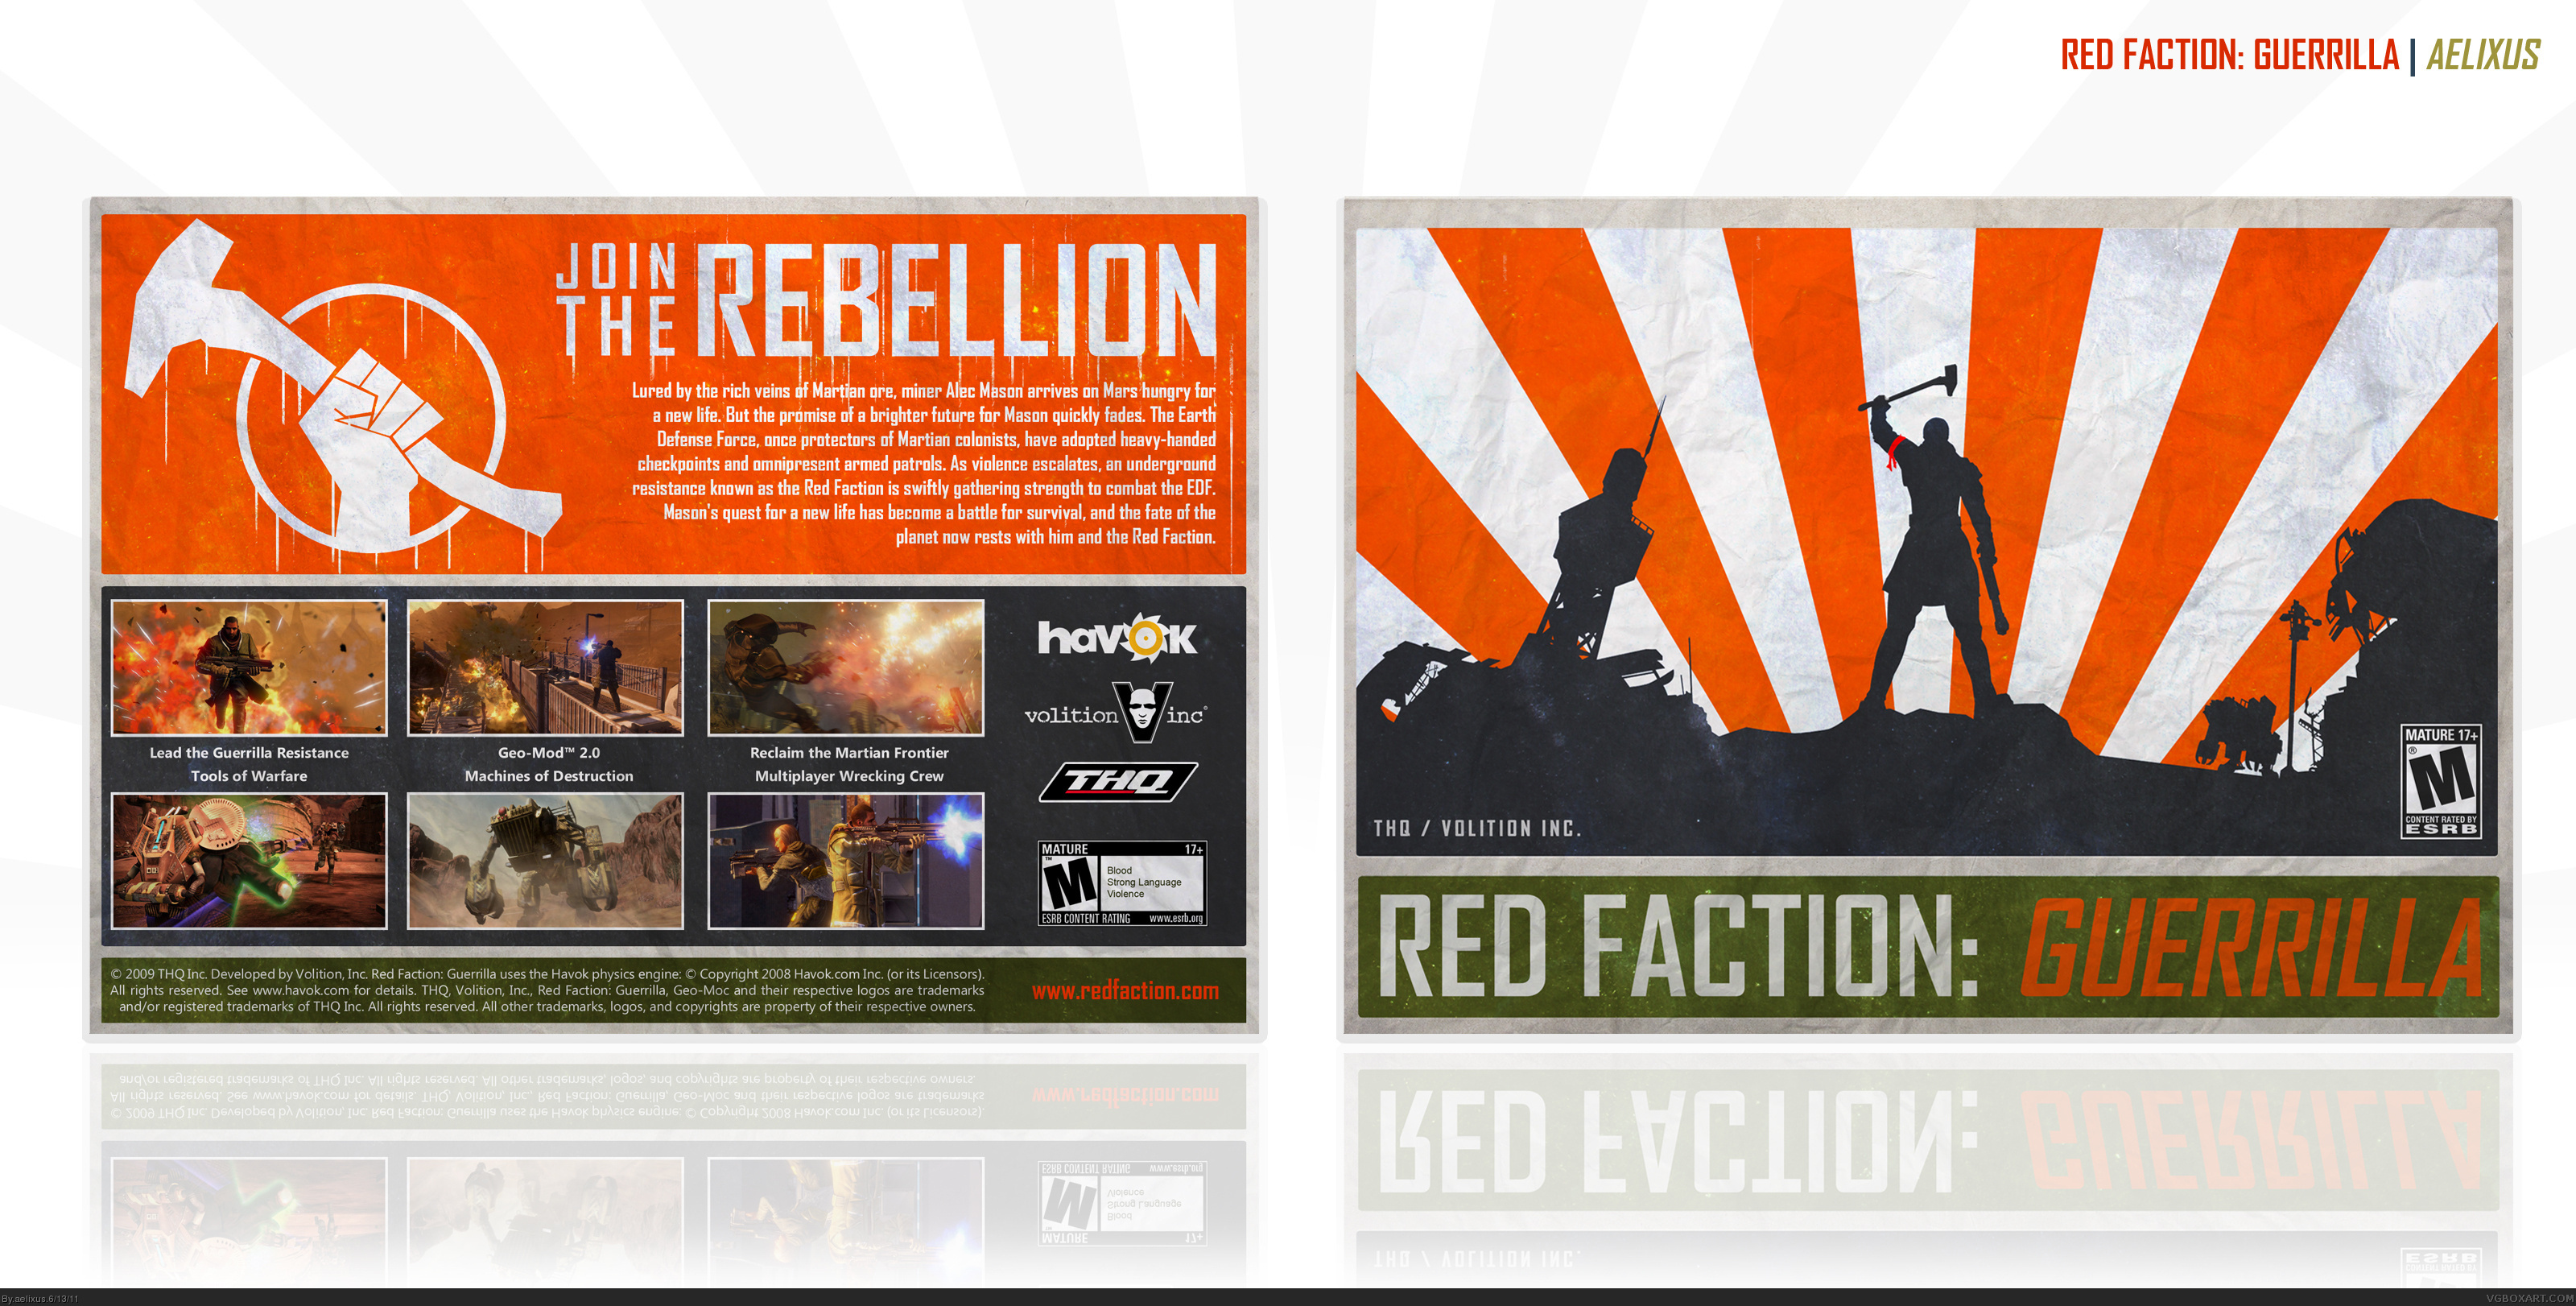 Viewing Full Size Red Faction Guerrilla Box Cover